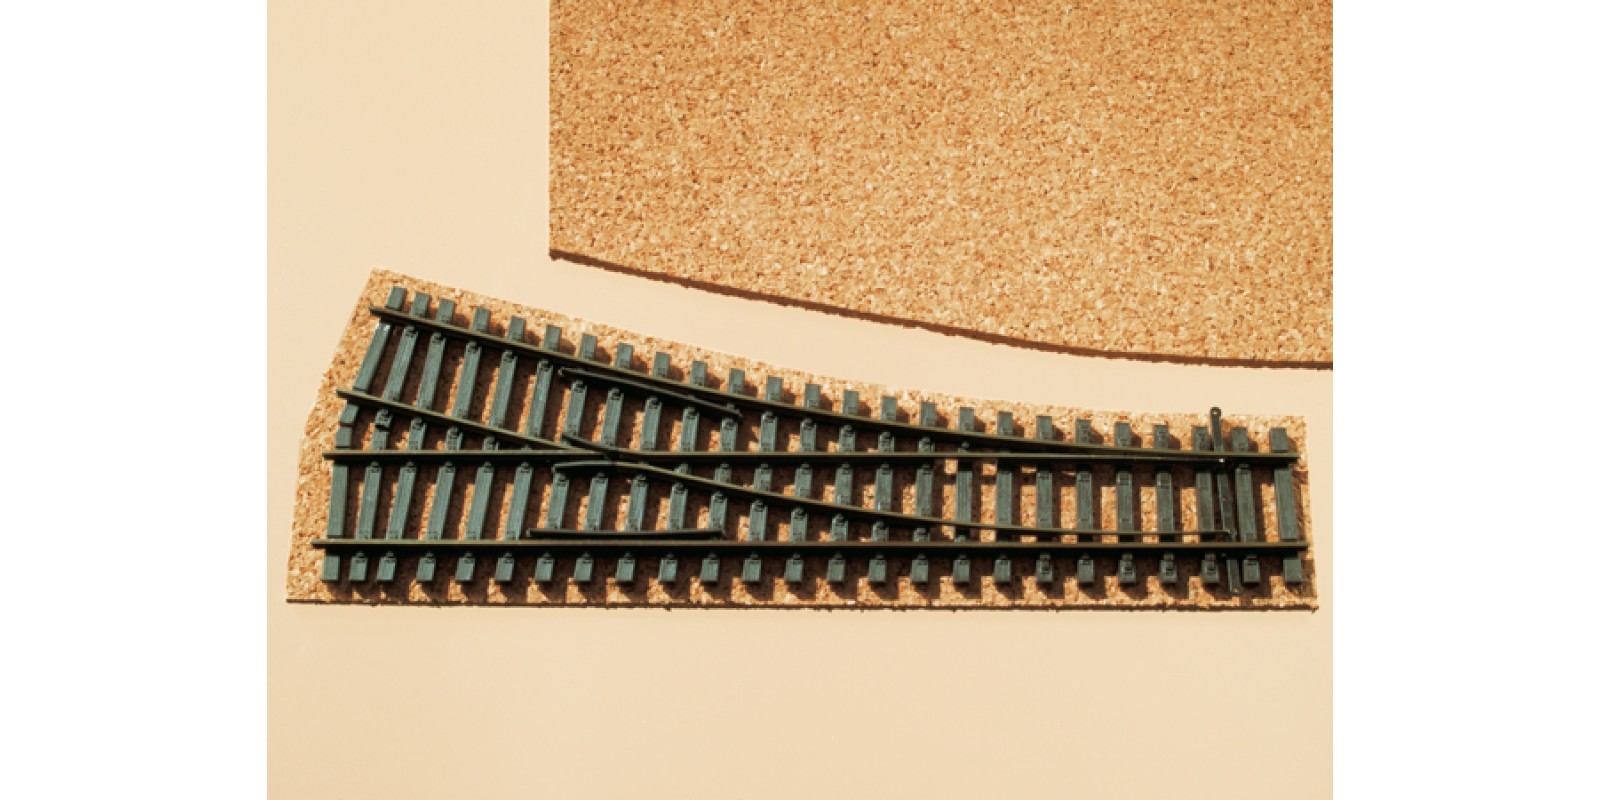 AU41179 Cork track underlay for turnouts